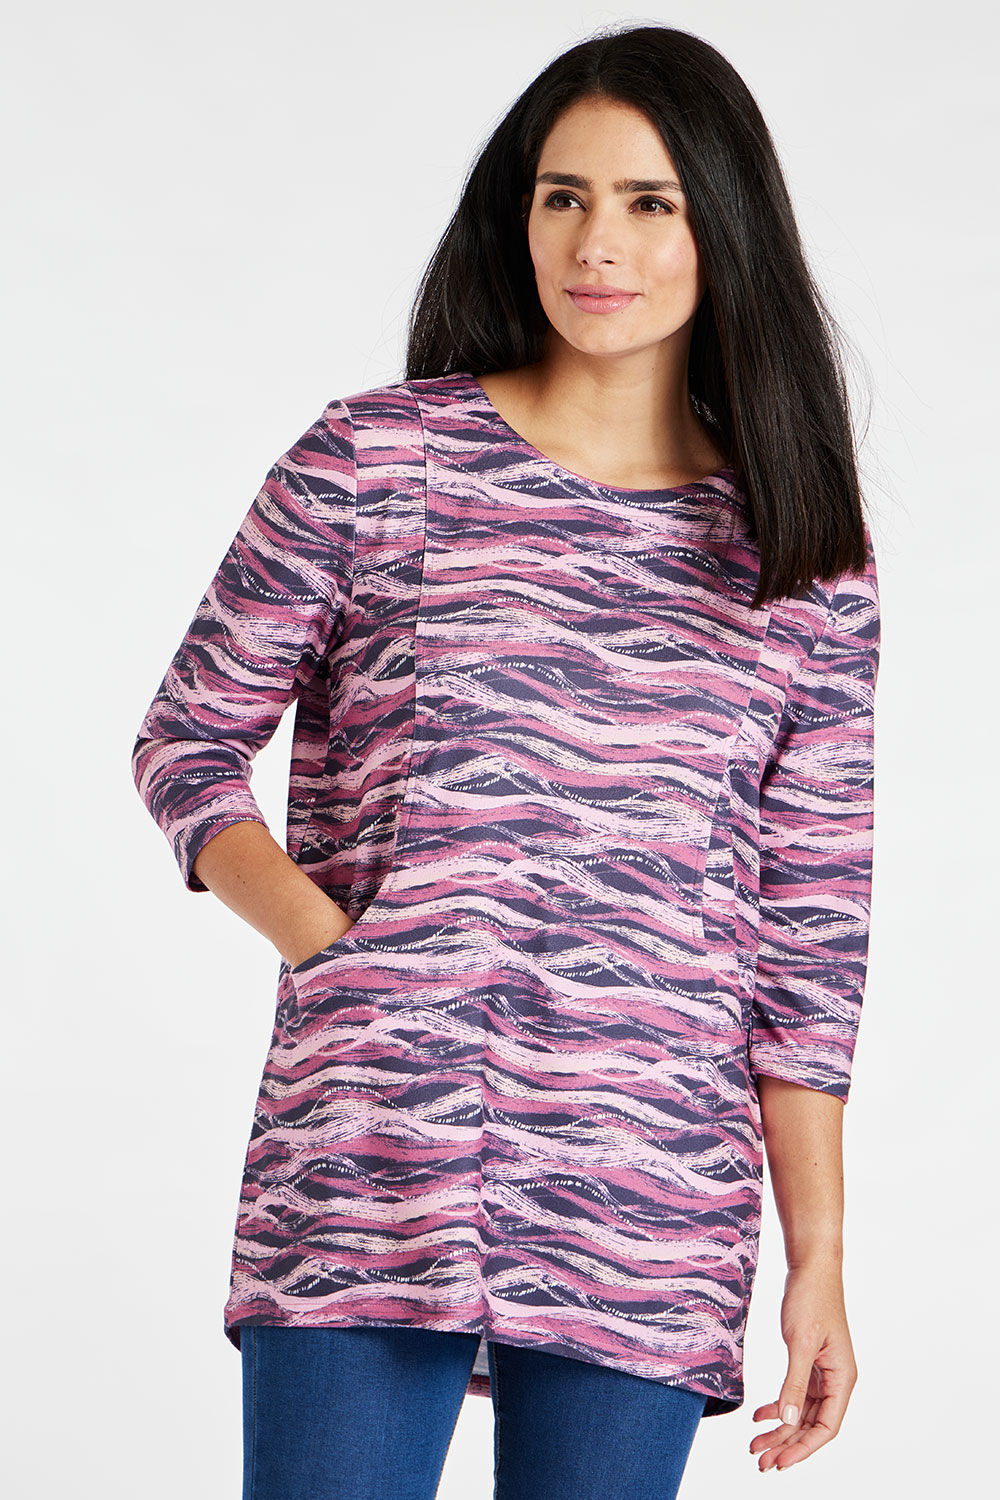 Bonmarche Women’s Pink Striped 3/4 Sleeve Wavy Print Soft Touch Tunic with Pocket Detail, Size: 10